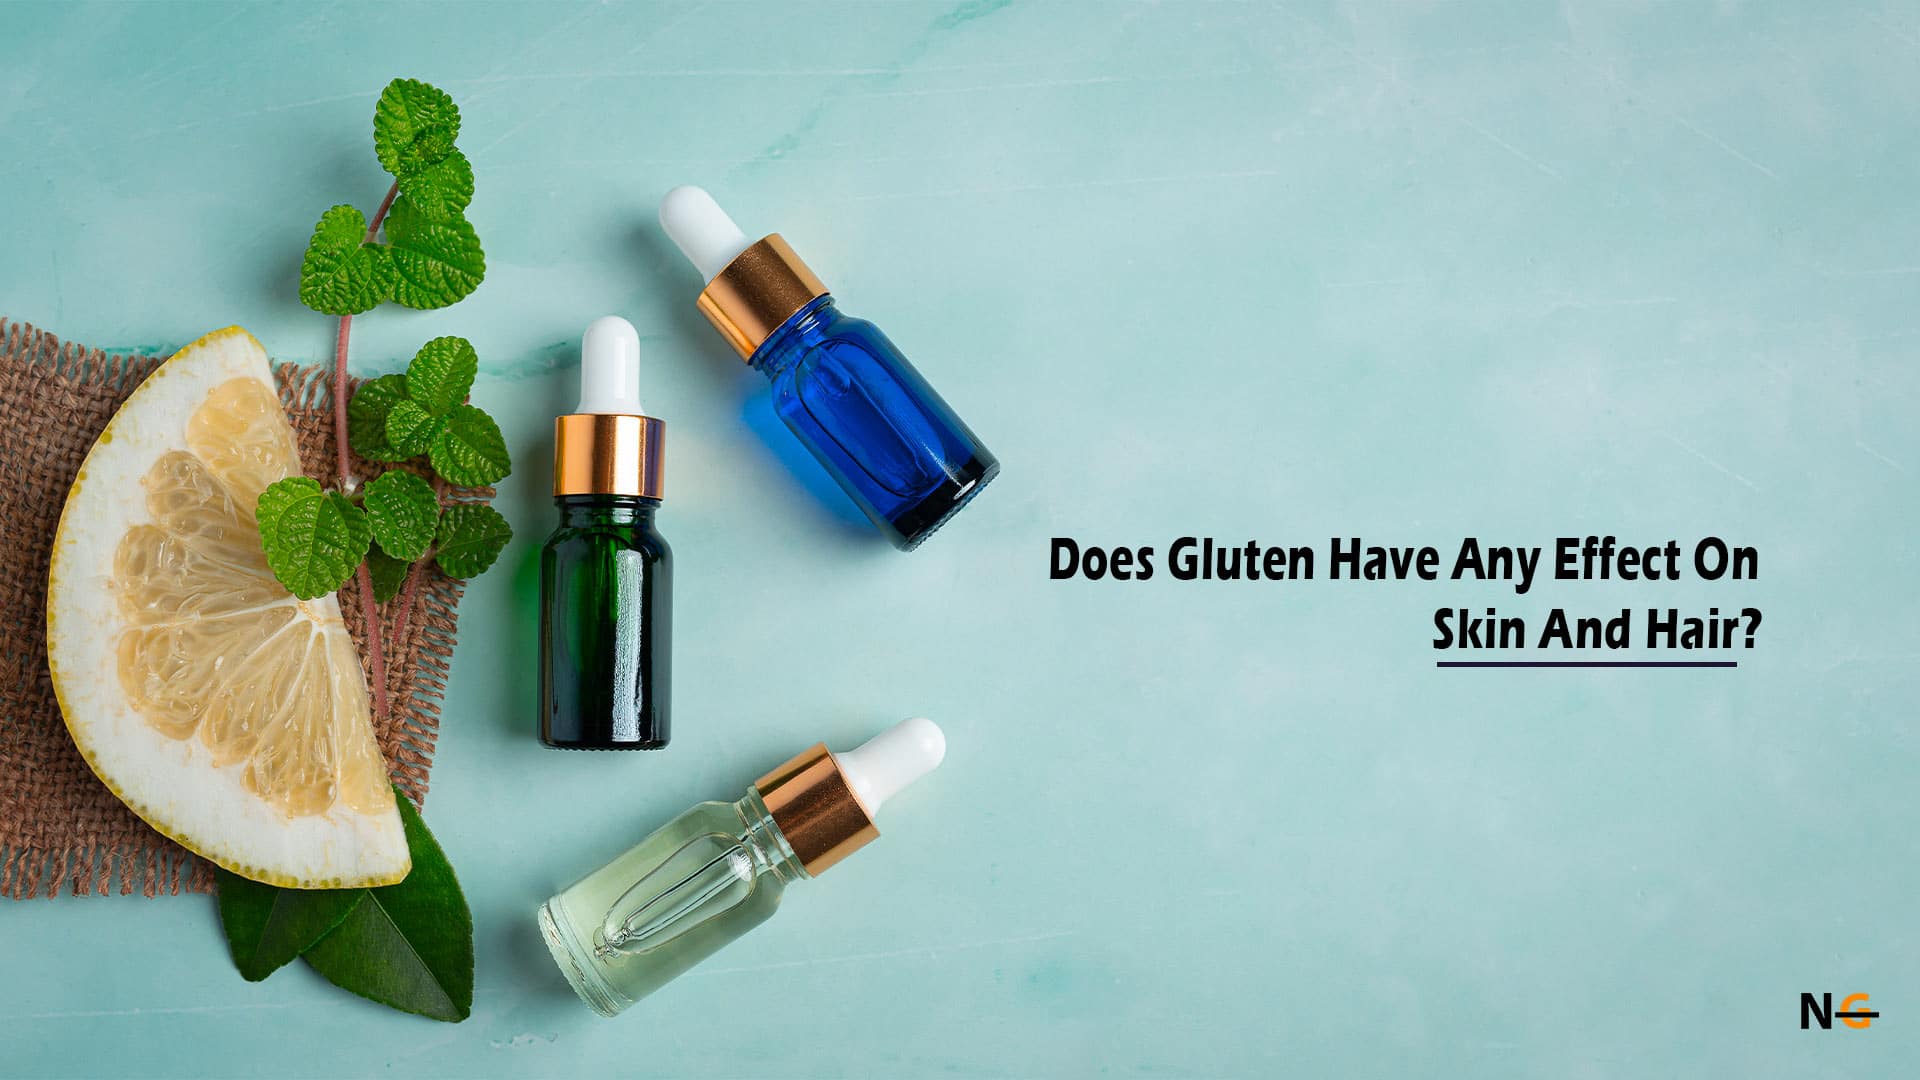 Does Gluten Have Any Effect on Skin and Hair